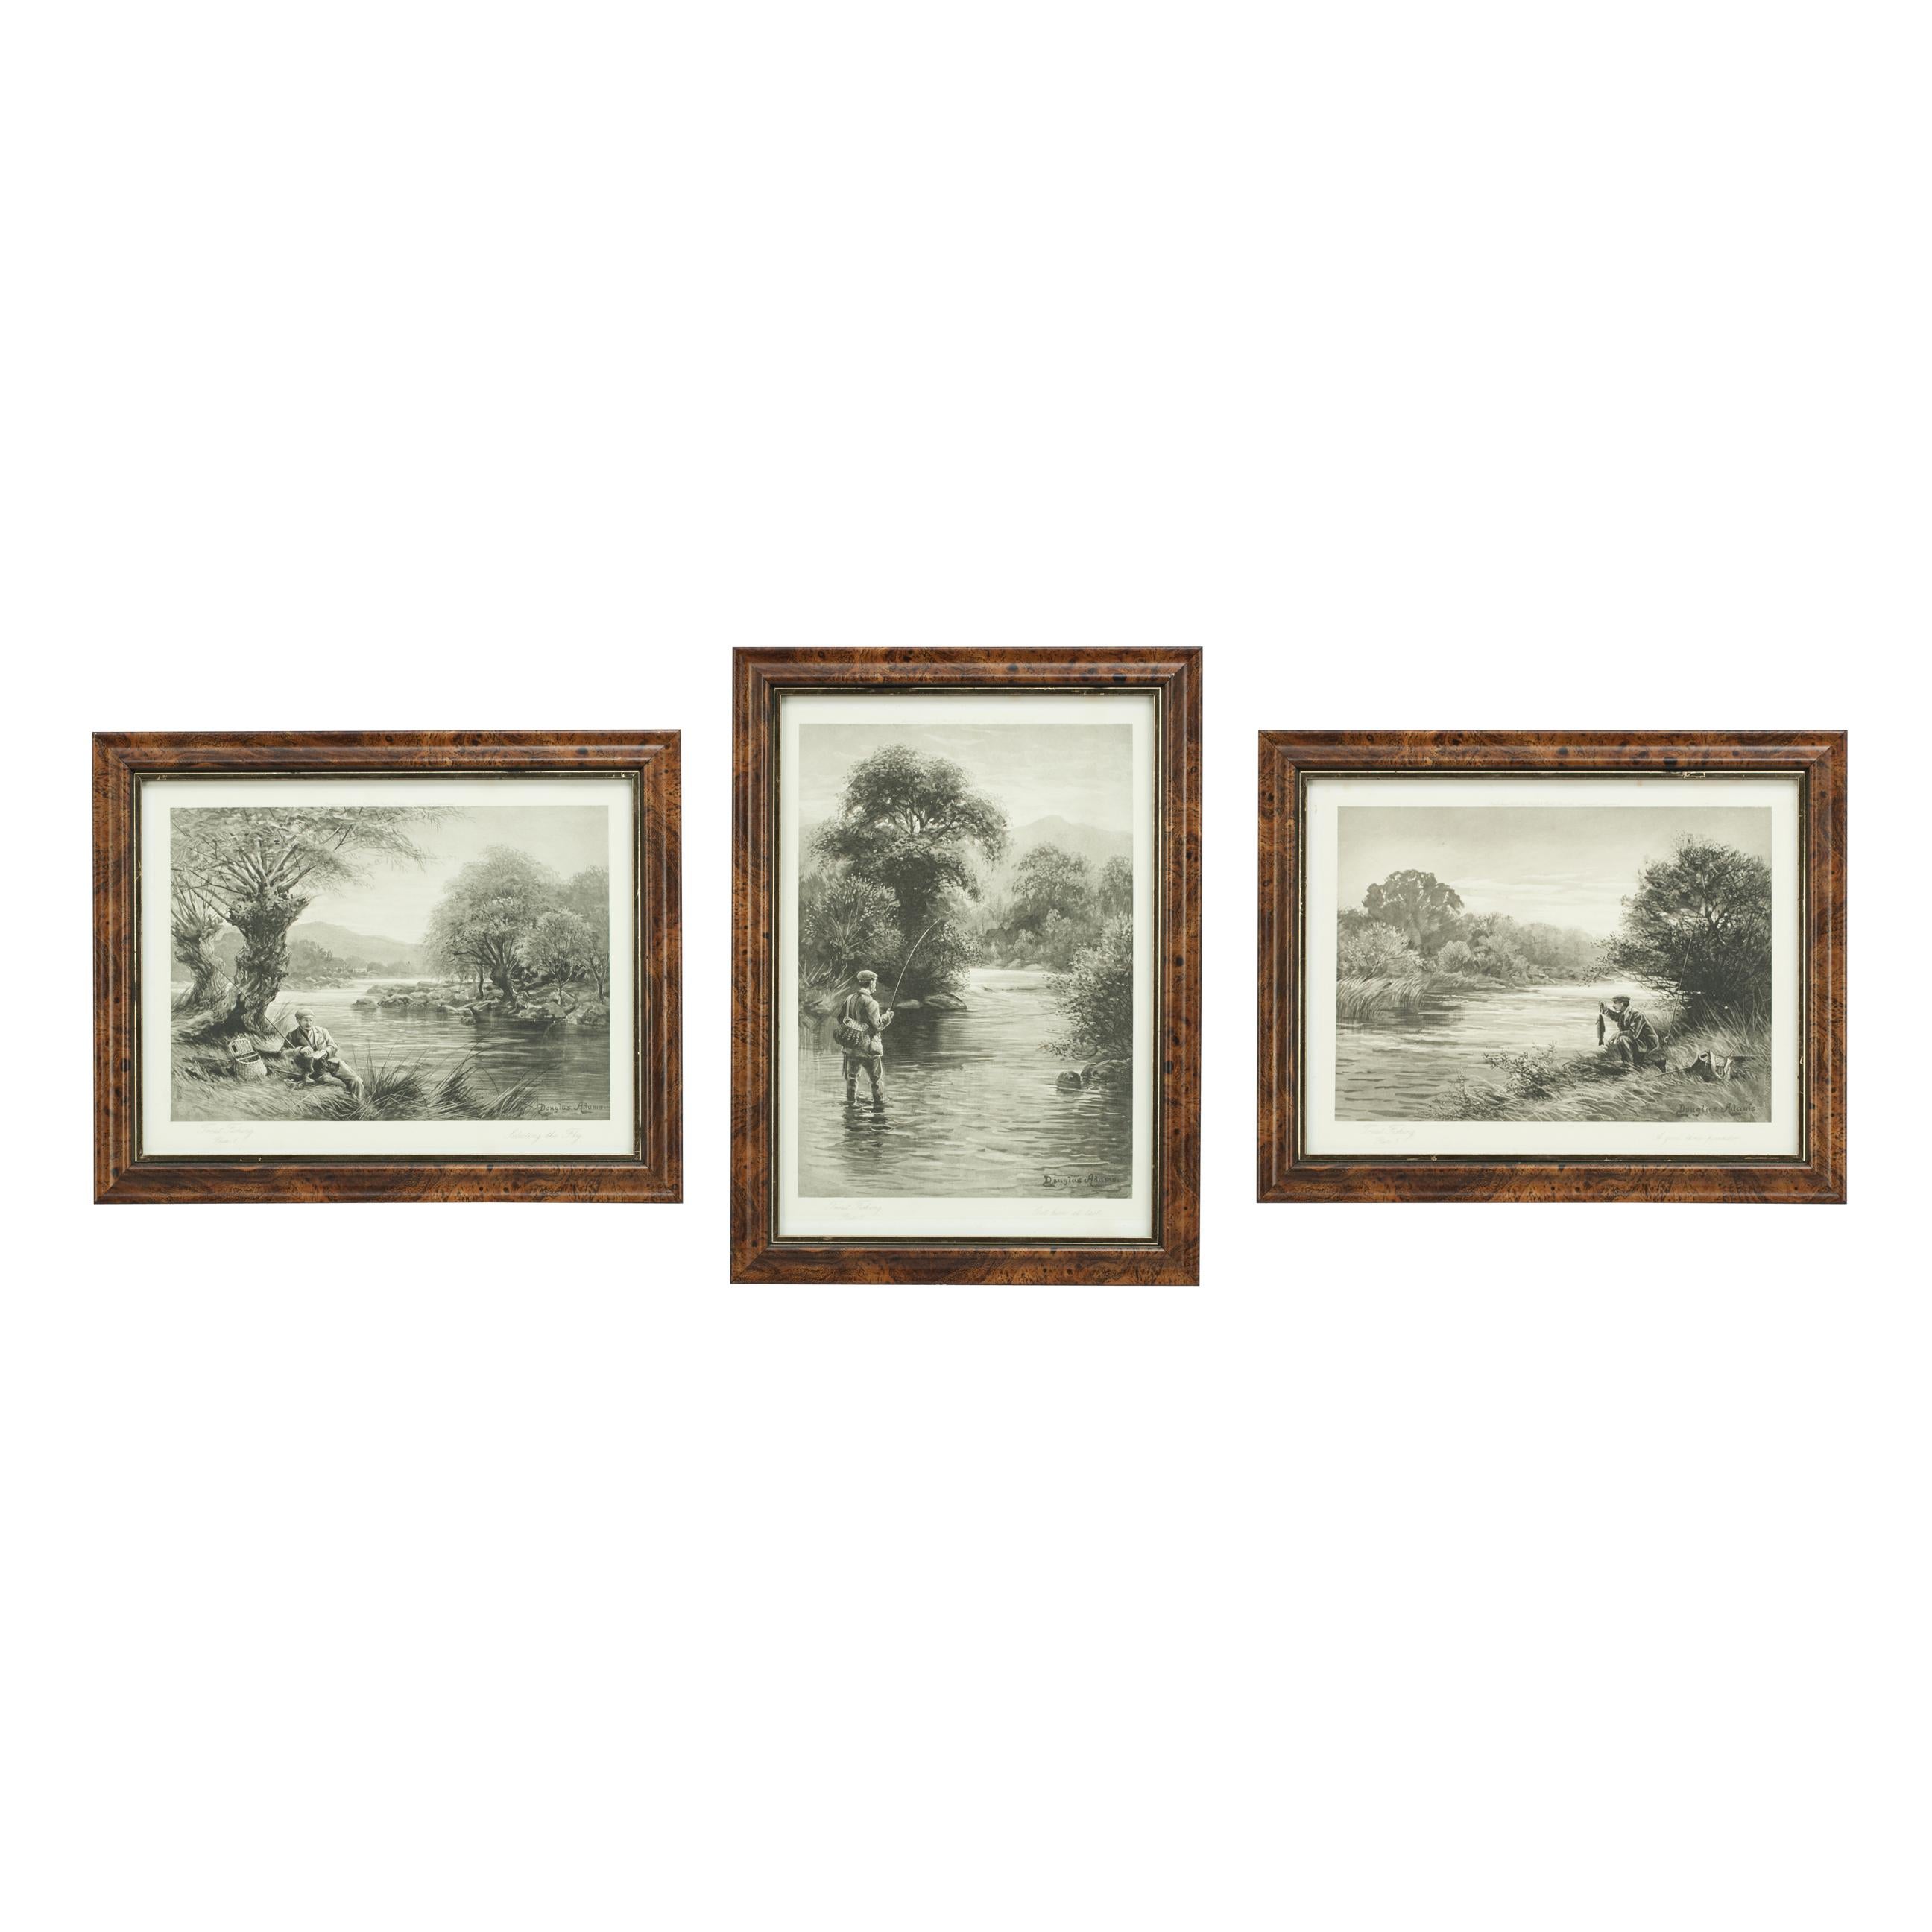 Antique Trout Fishing Prints, Set of Three Photogravures.